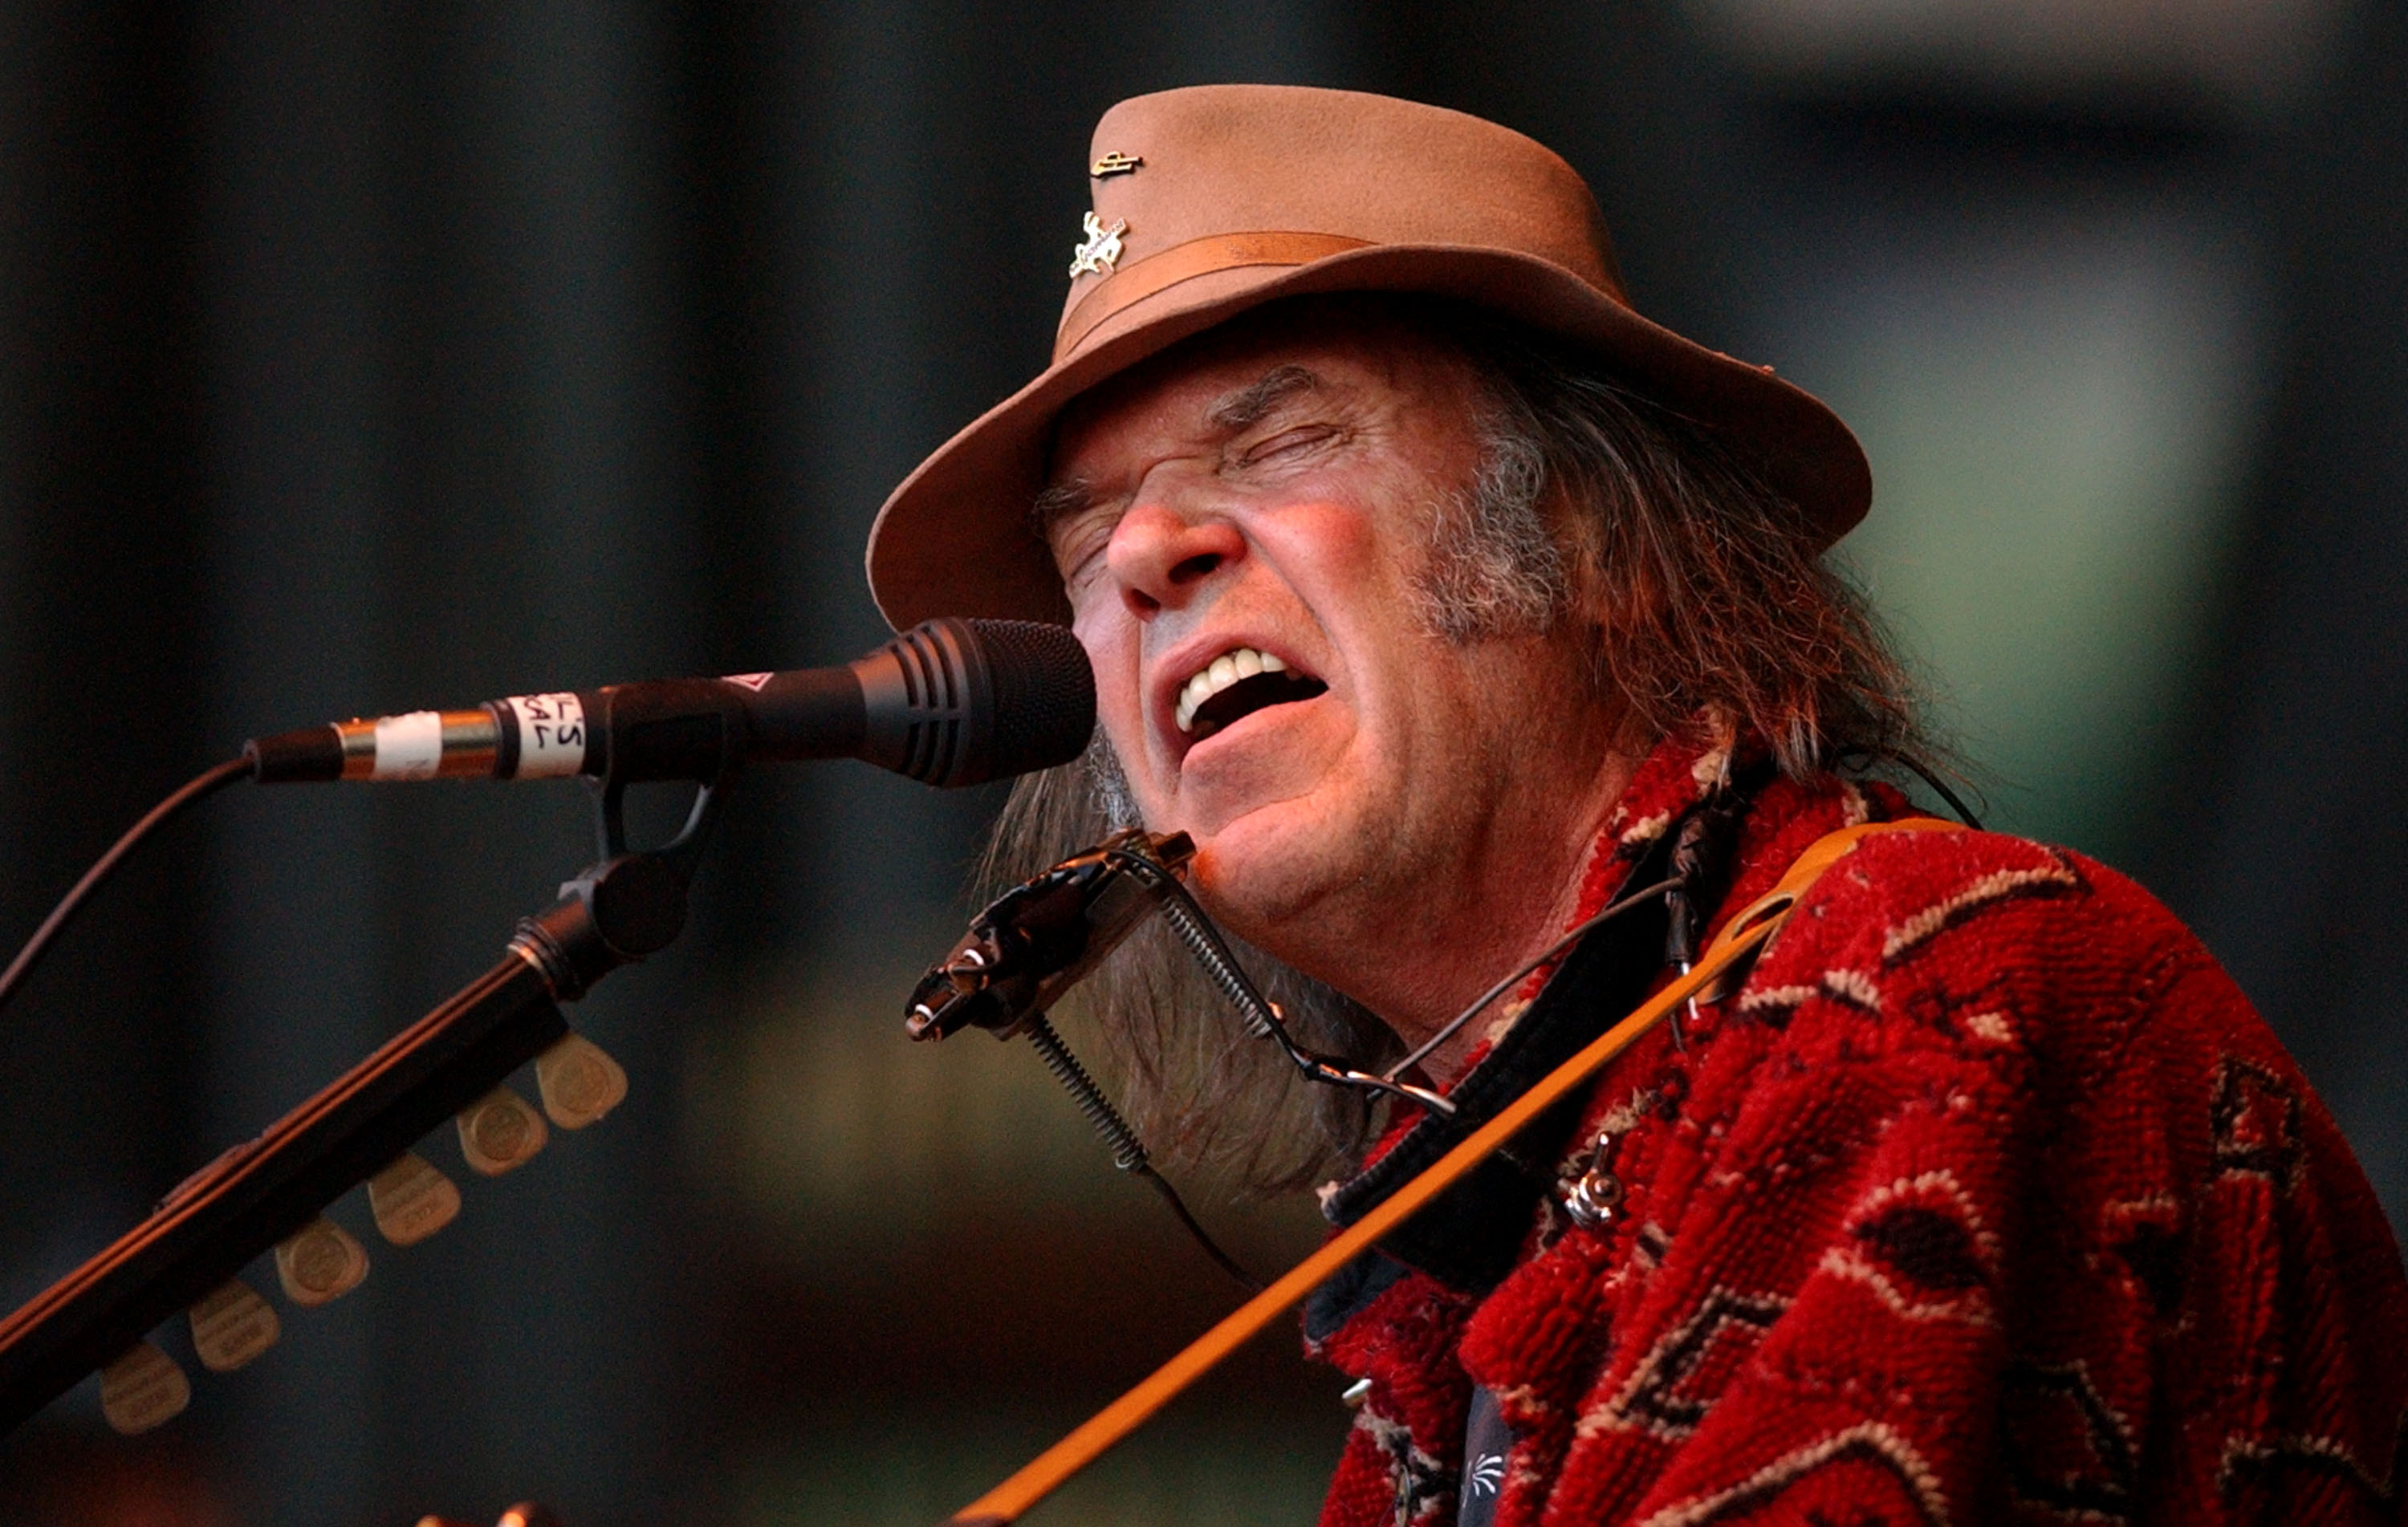 neil young - photo #36